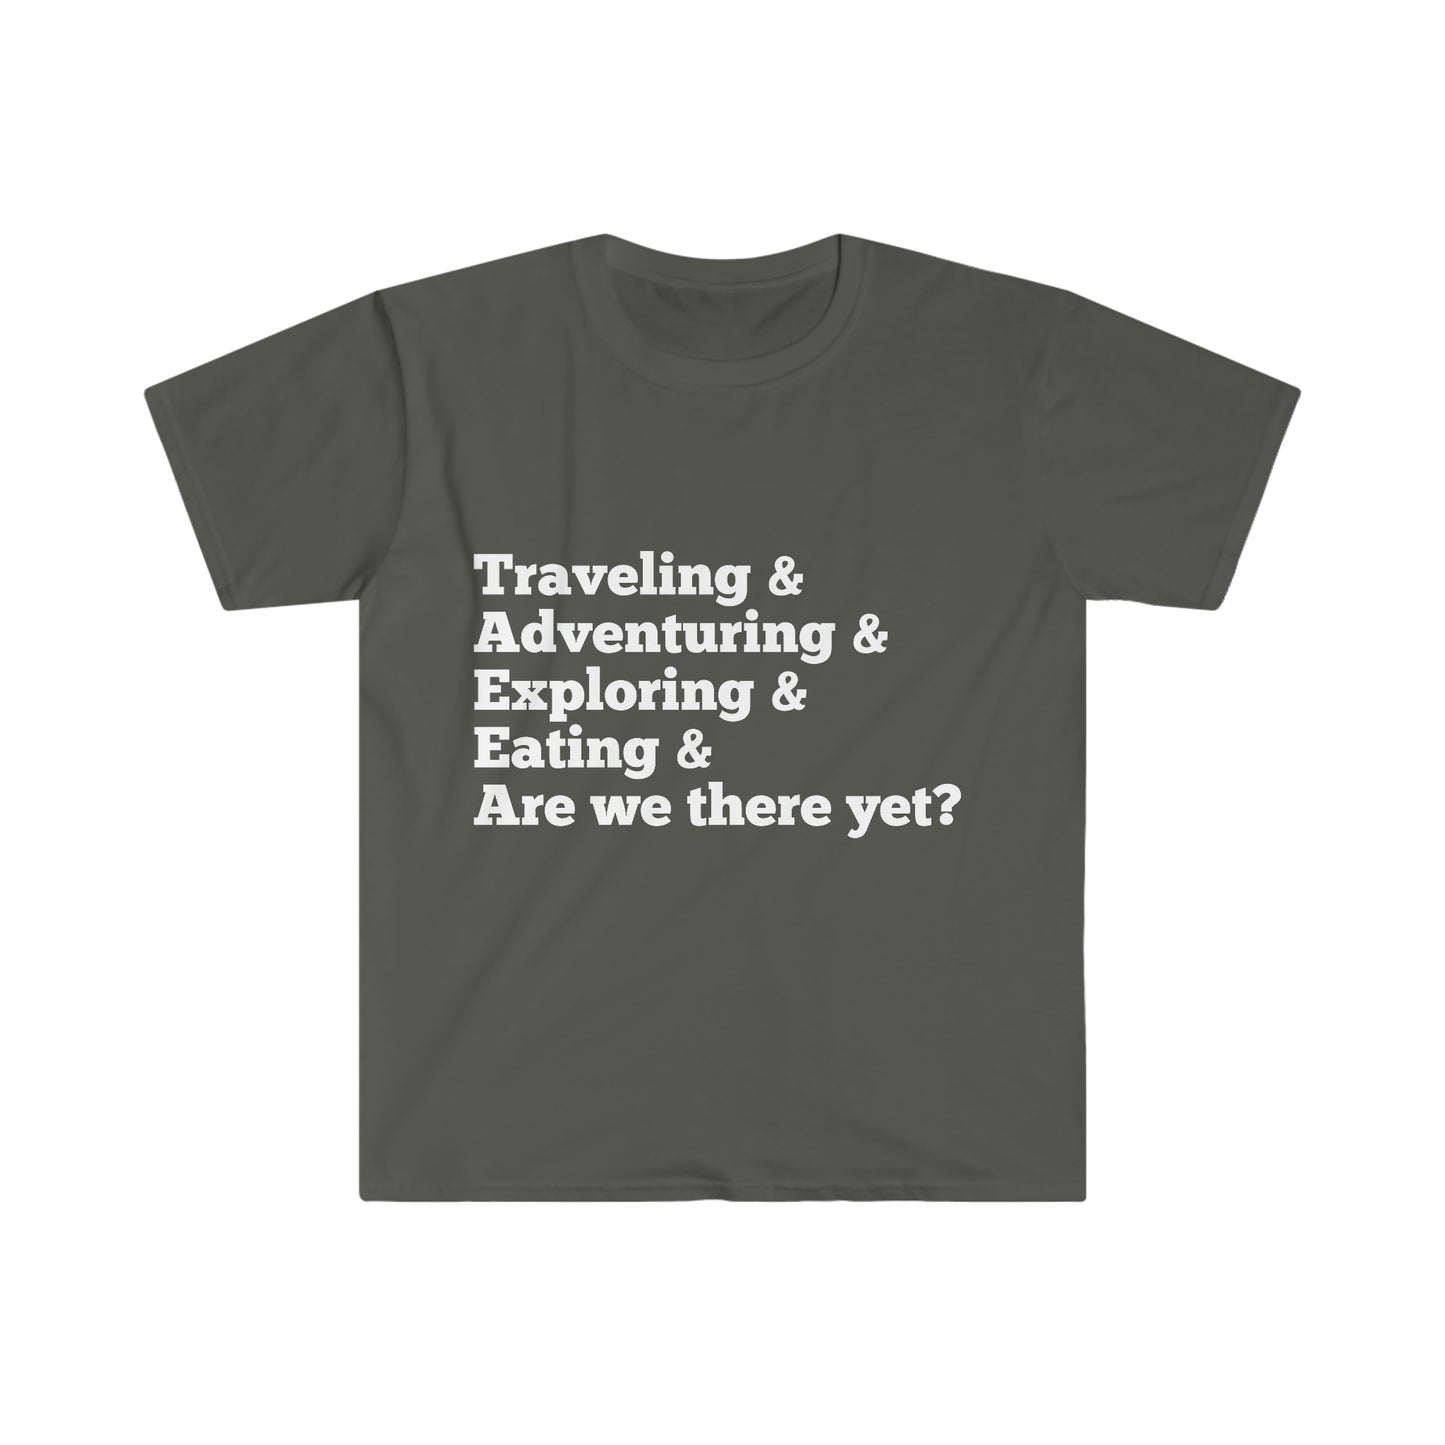 Travel and Adventure T-shirt A Perfect Gift for the Avid Traveler in Your Life